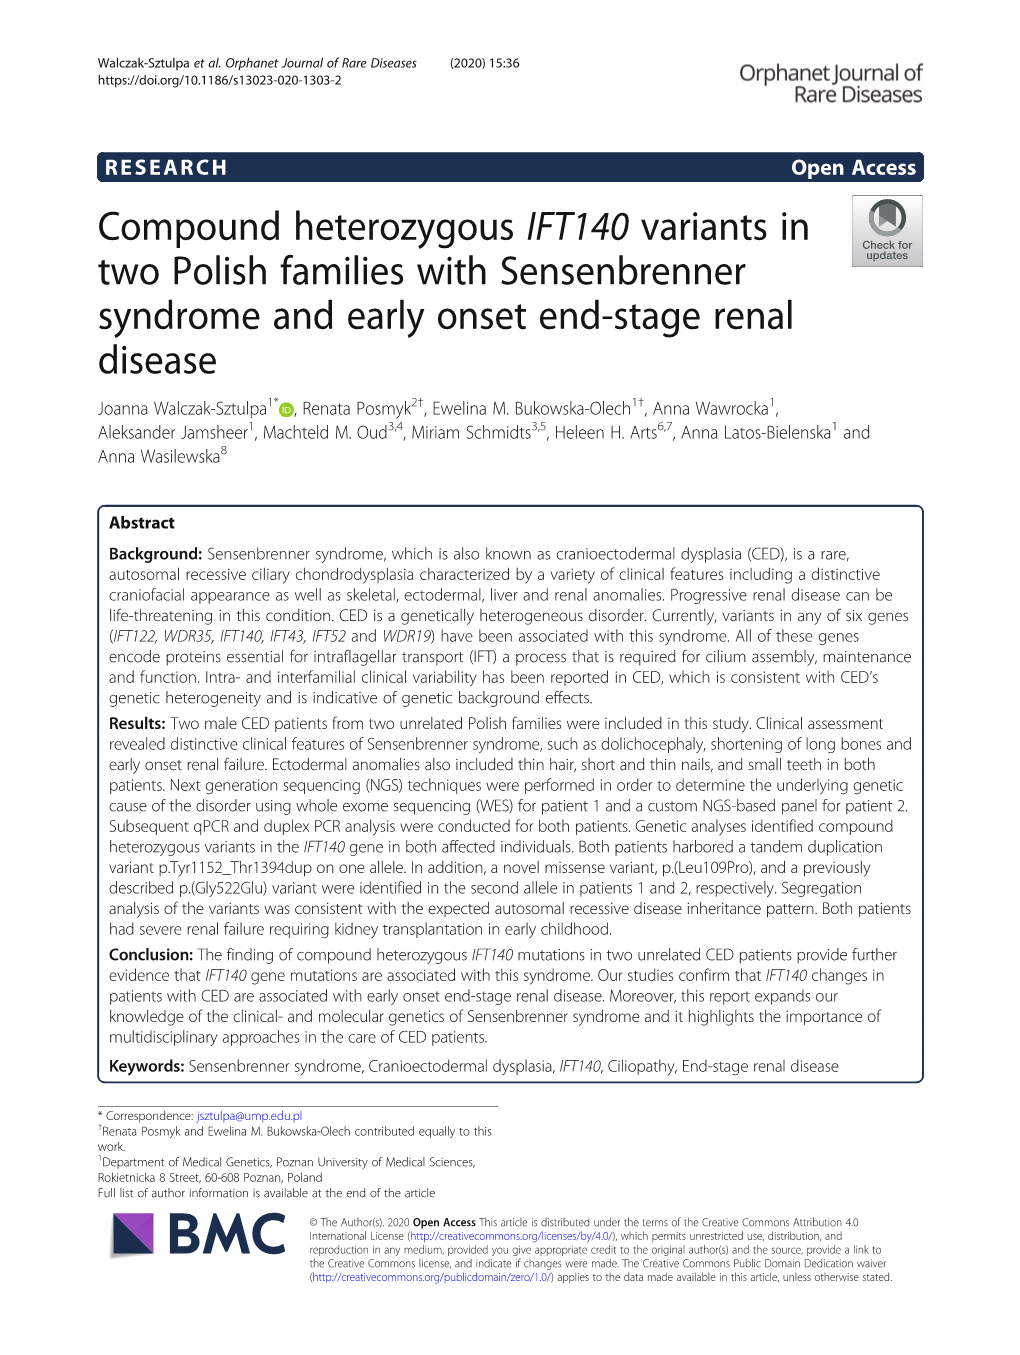 Compound Heterozygous IFT140 Variants in Two Polish Families With